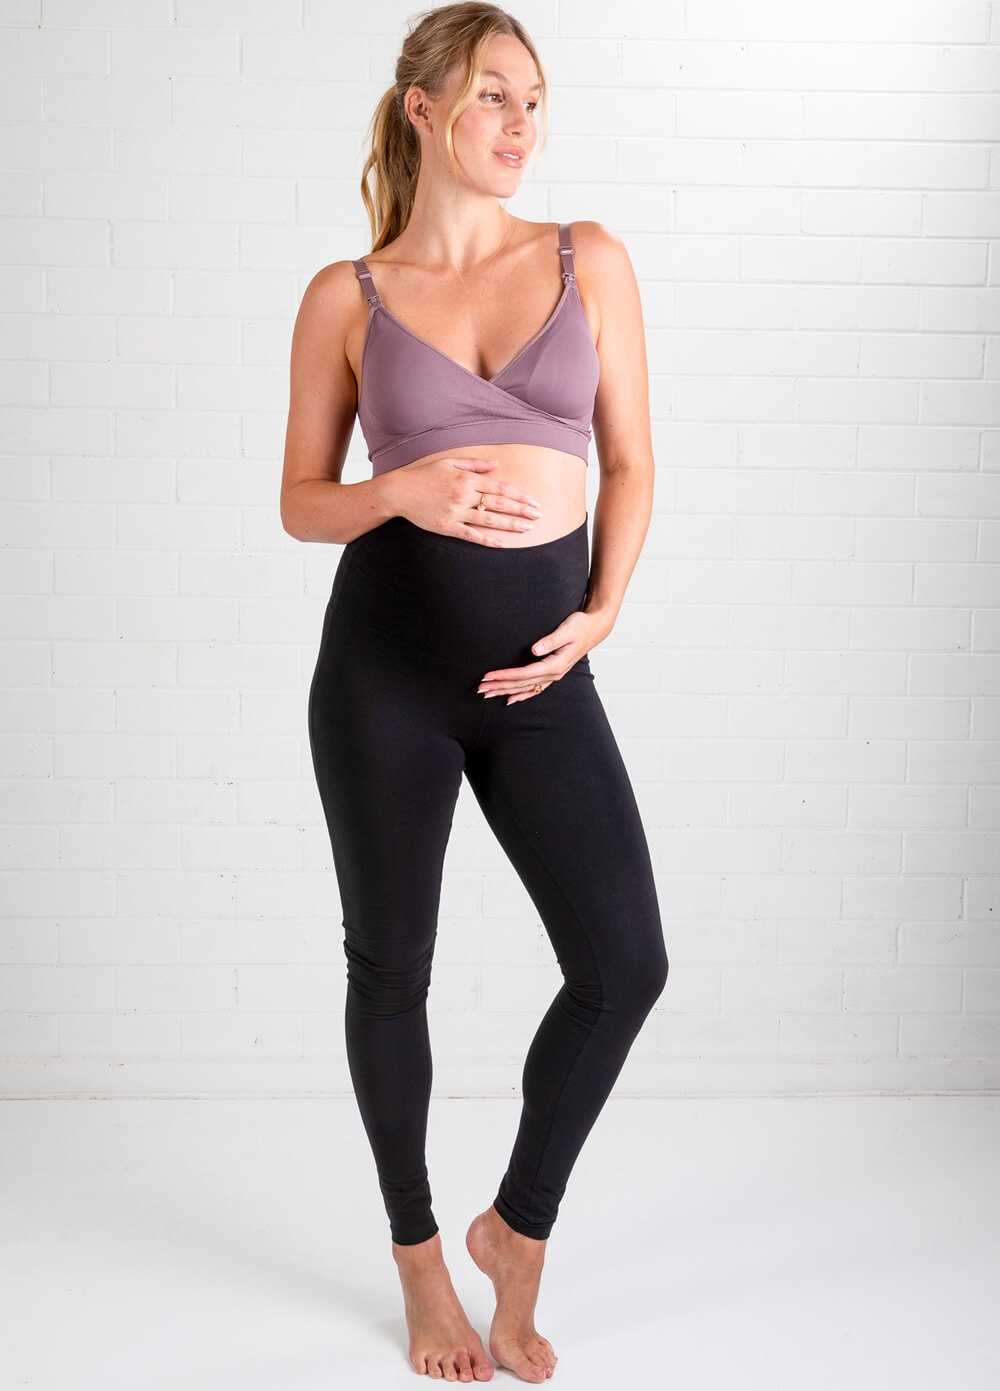 OverBelly Stretchy Cotton Jersey Maternity Leggings